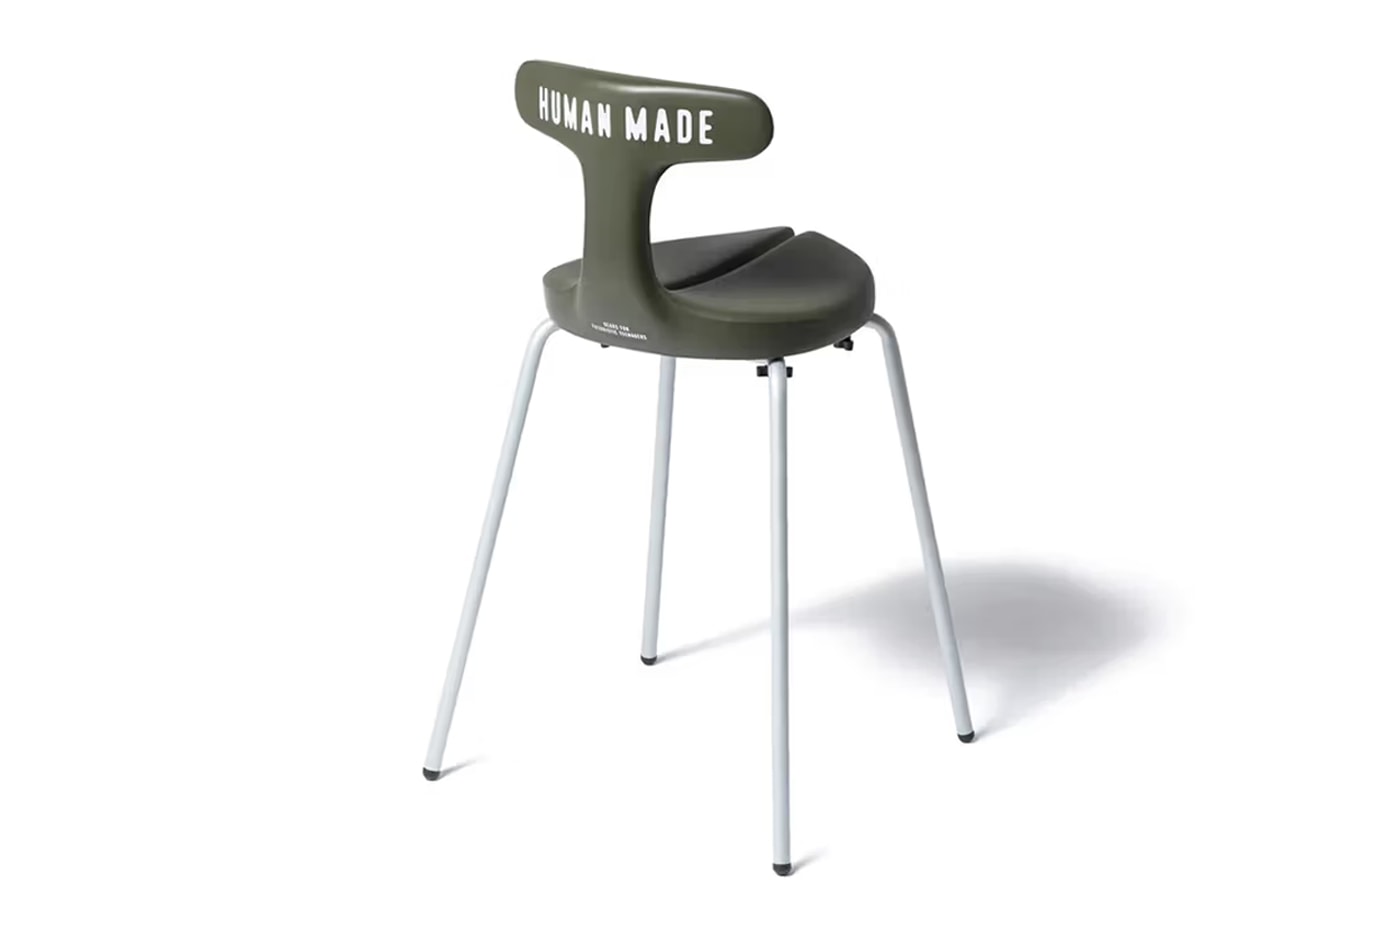 HUMAN MADE ayur chair Collaboration Olive Drab Colorway Release Info